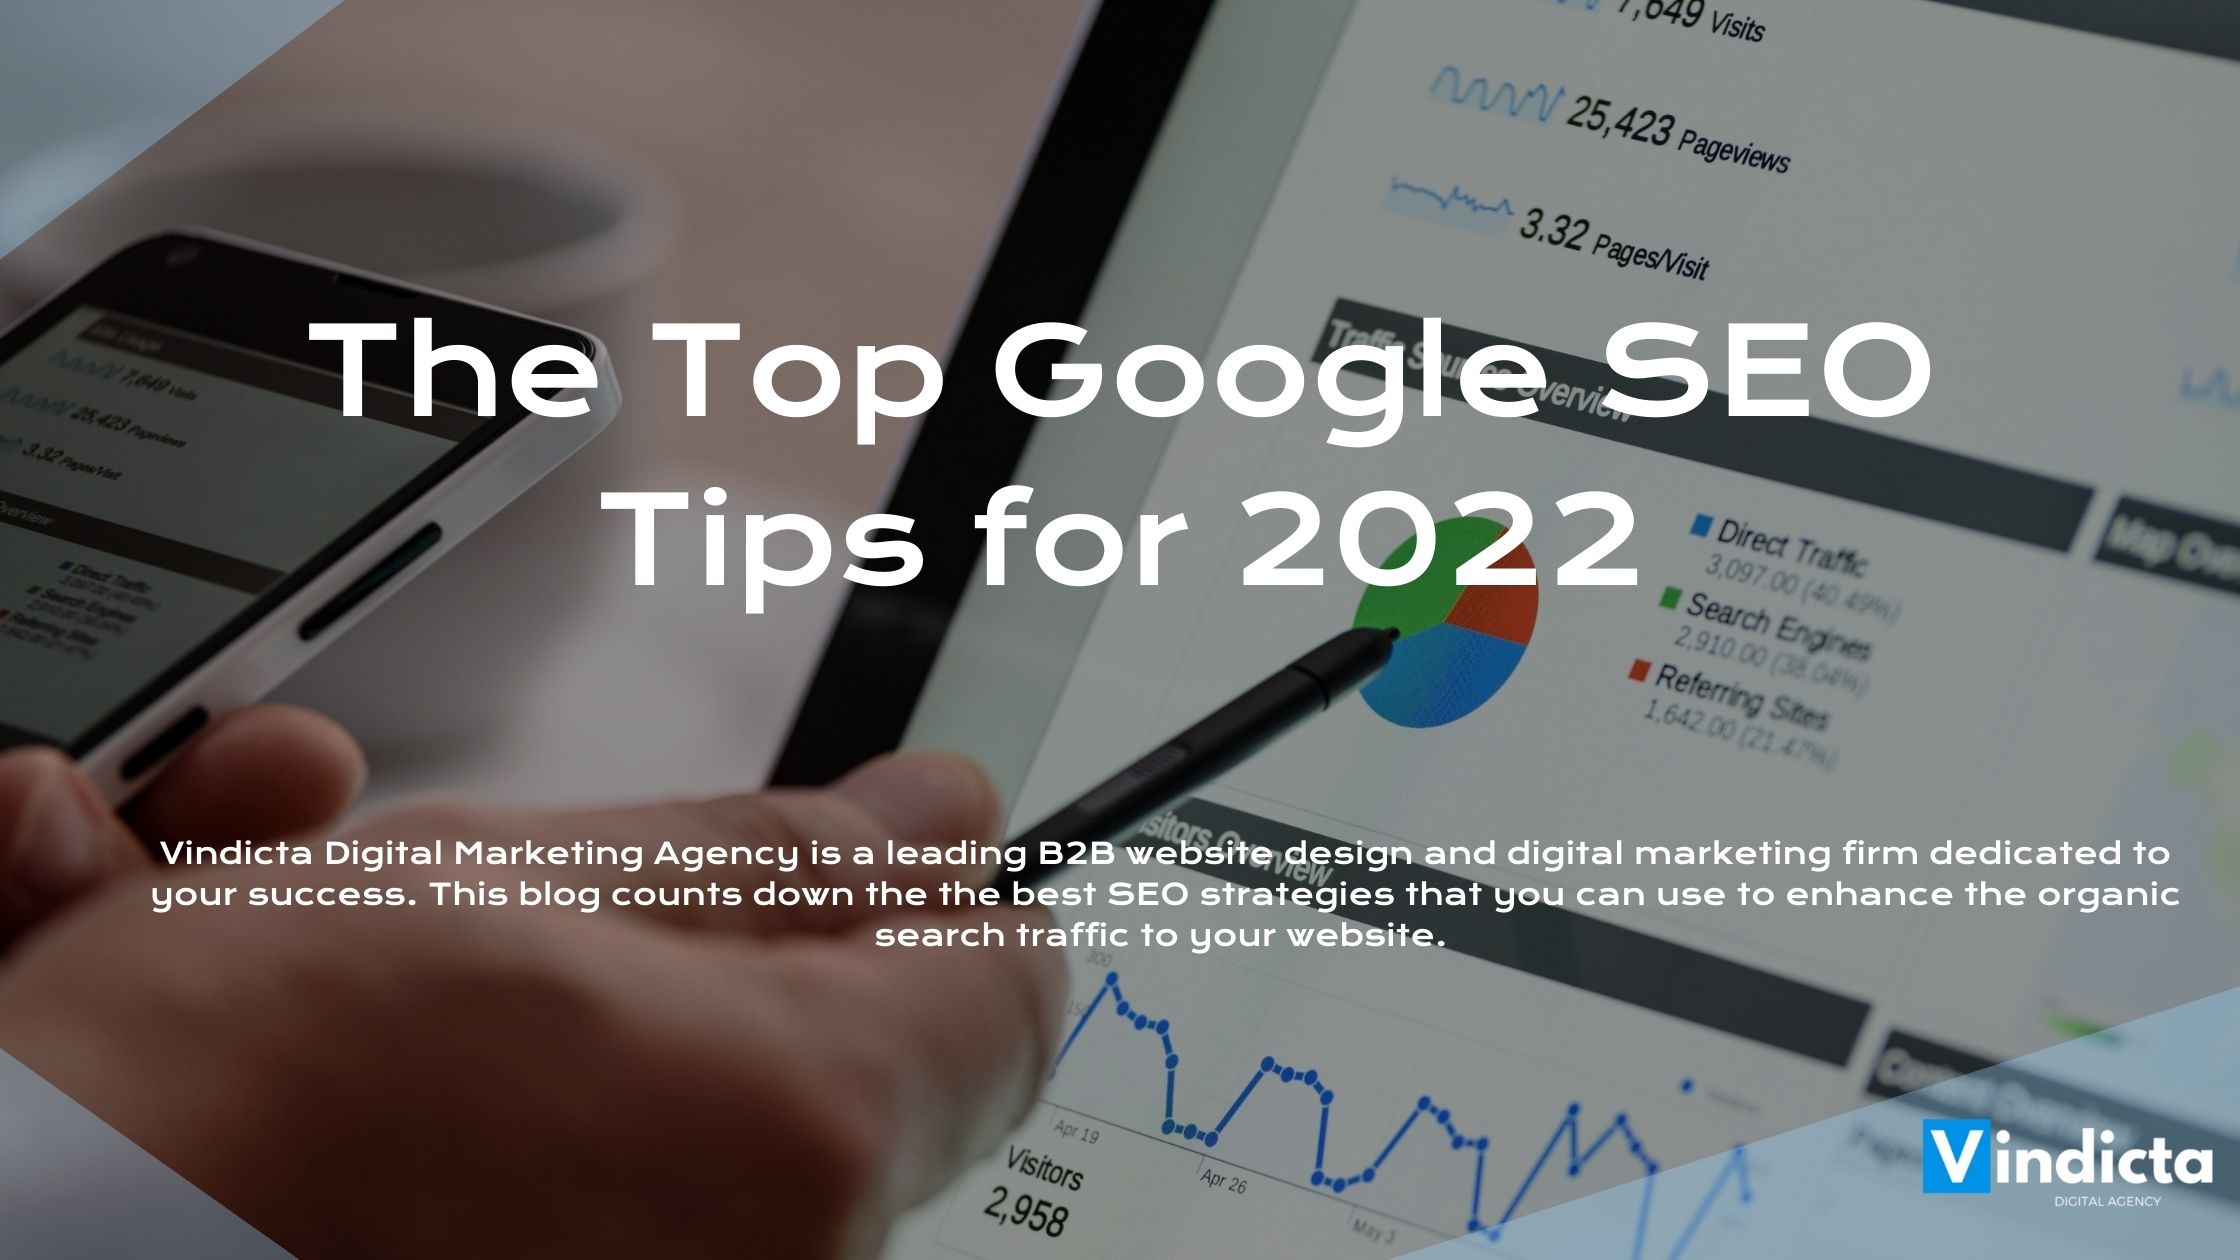 The Top Google SEO Tips for 2022